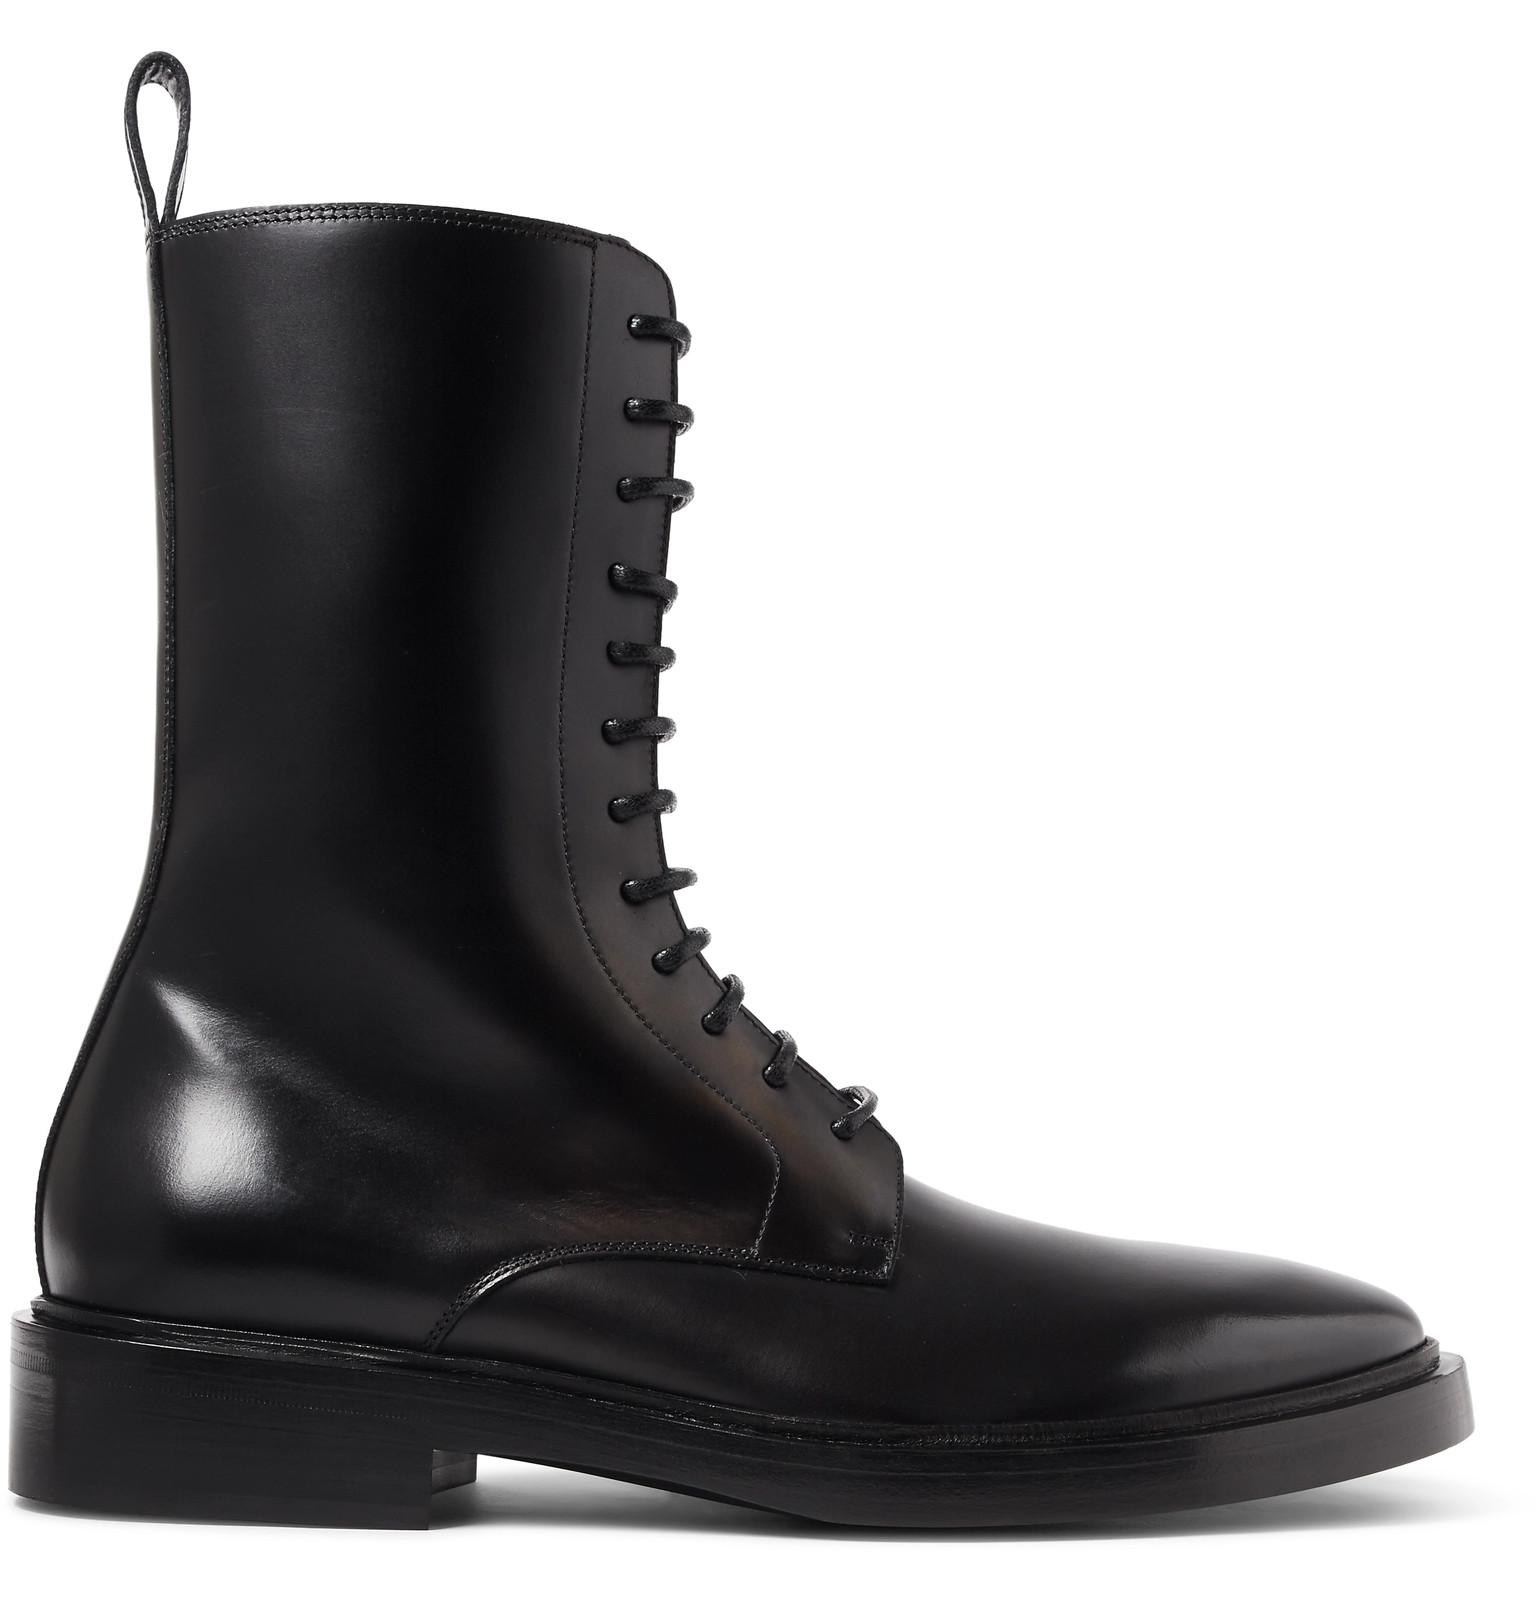 Balenciaga Leather Combat Boots in Black for Men - Lyst